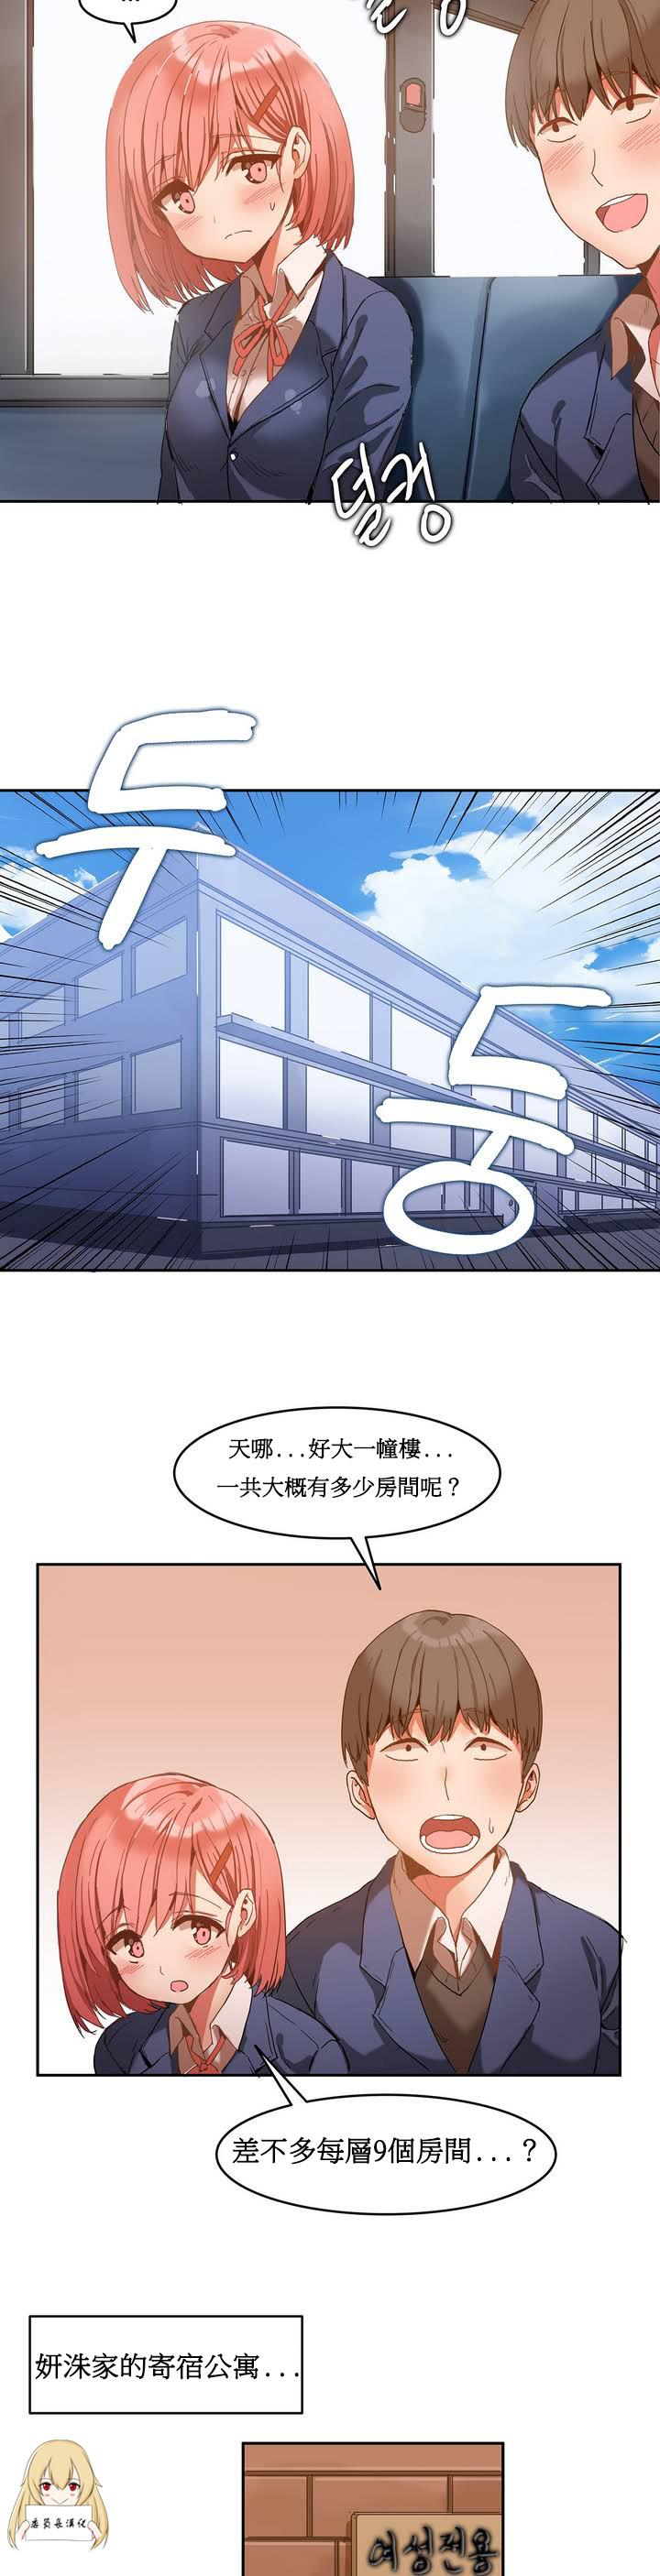 Online Hahri's Lumpy Boardhouse Ch. 1~5【委員長個人漢化】（持續更新） Big - Page 11